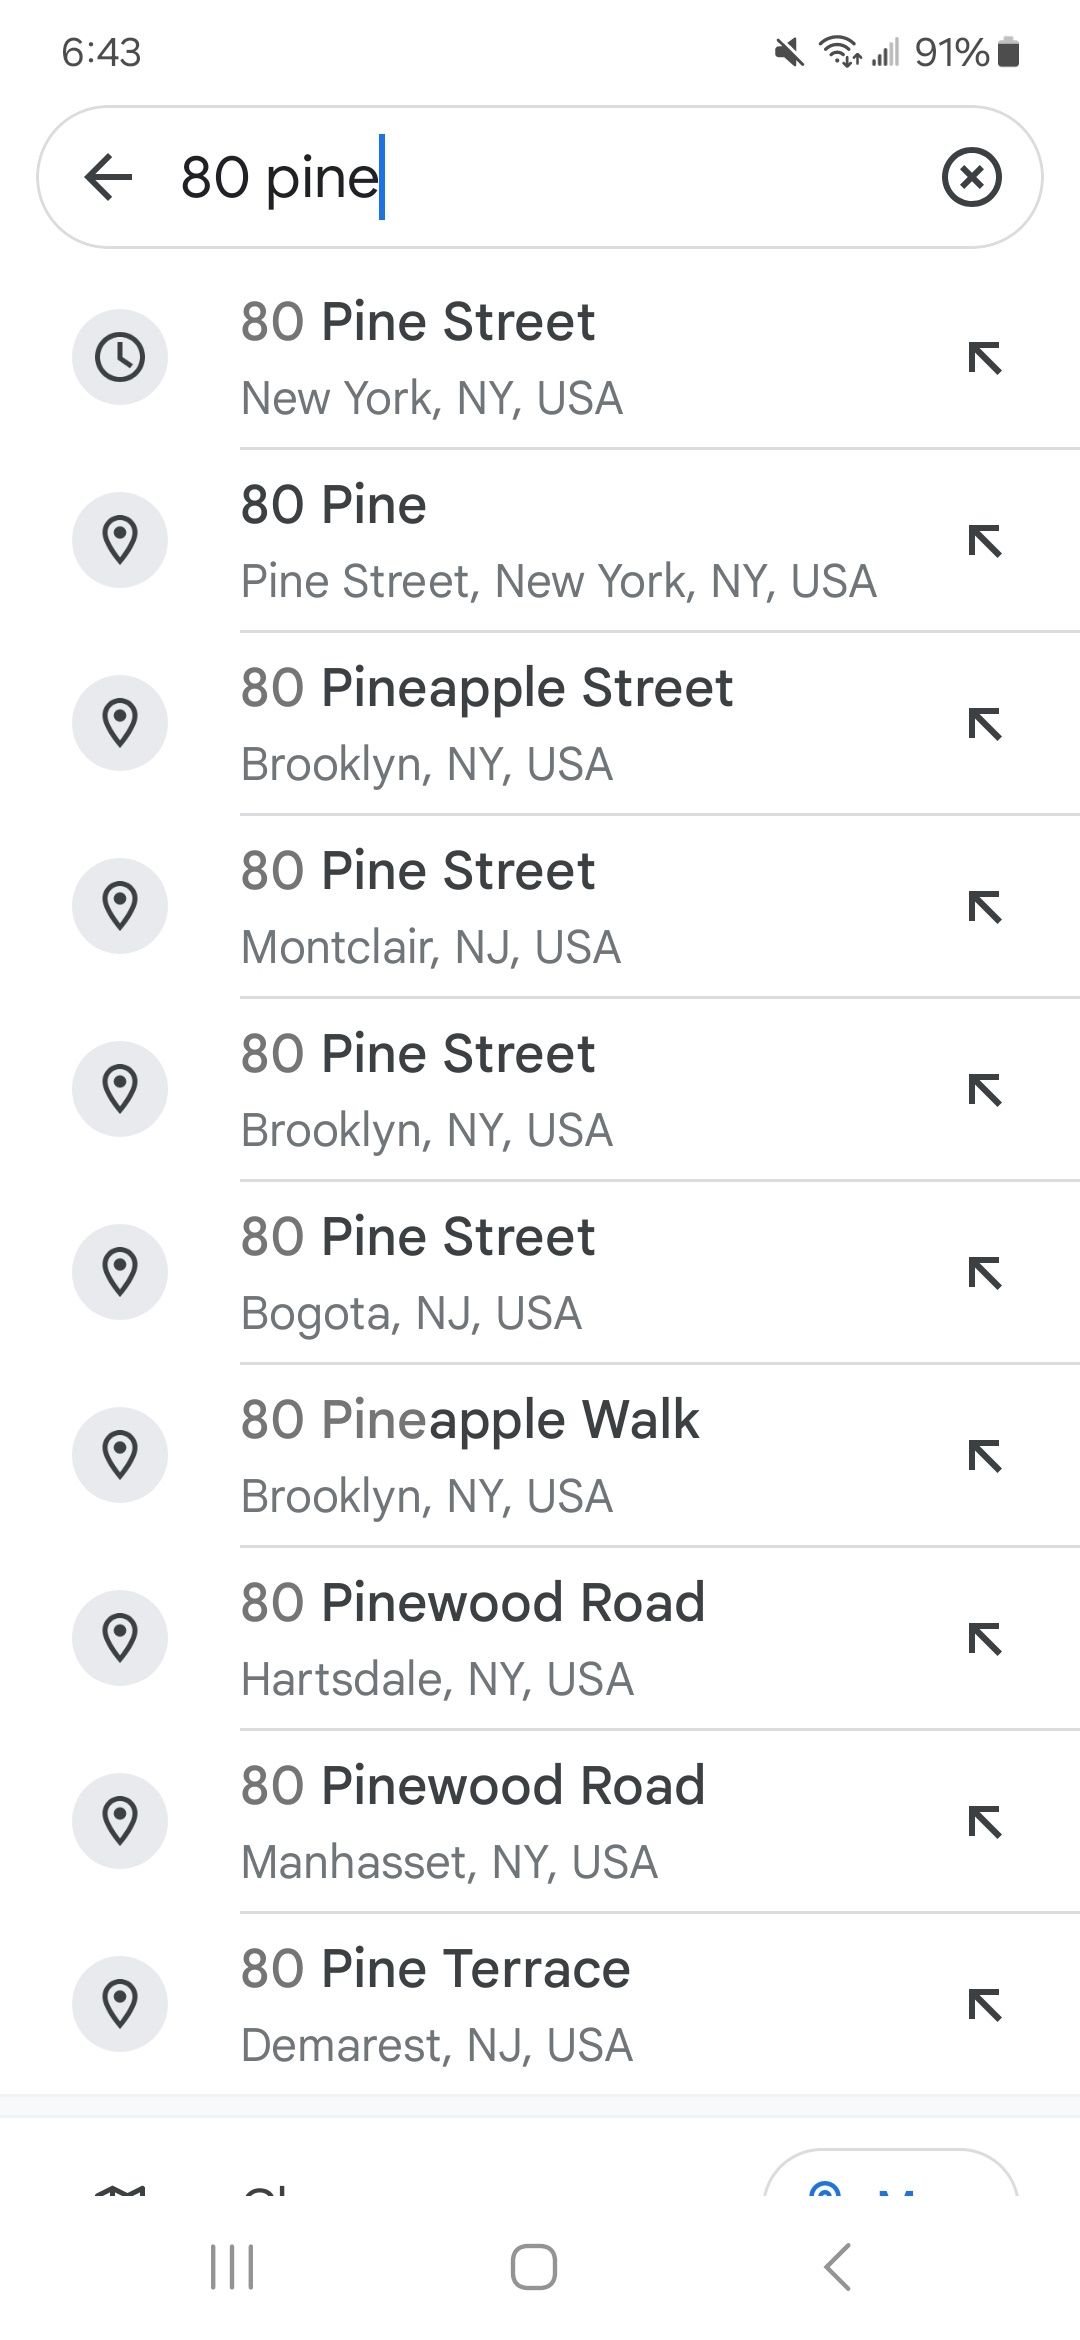 Searching for a location in the Google Maps app on a smartphone